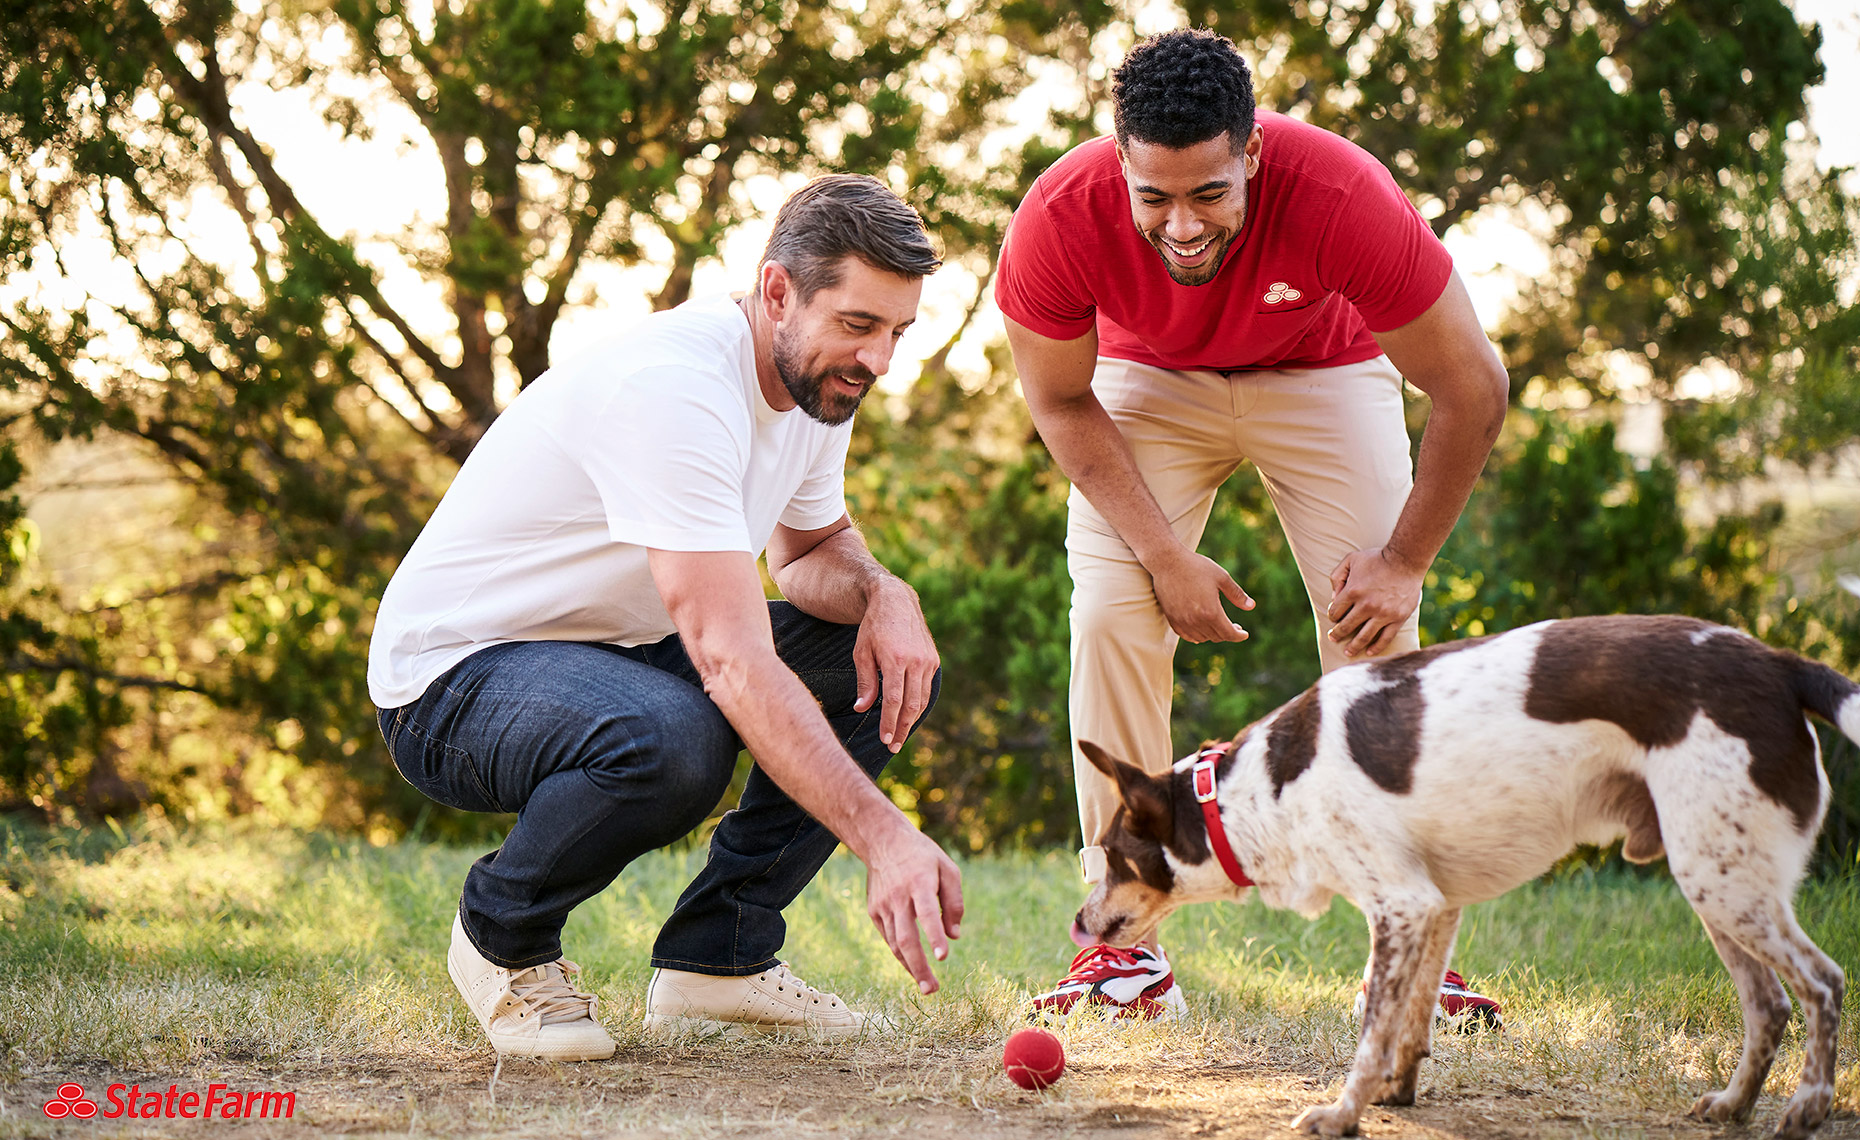 Commercial Celebrity Photography - Roger Snider - Aaron Rodgers and Jake from State Farm with dog in Austin TX